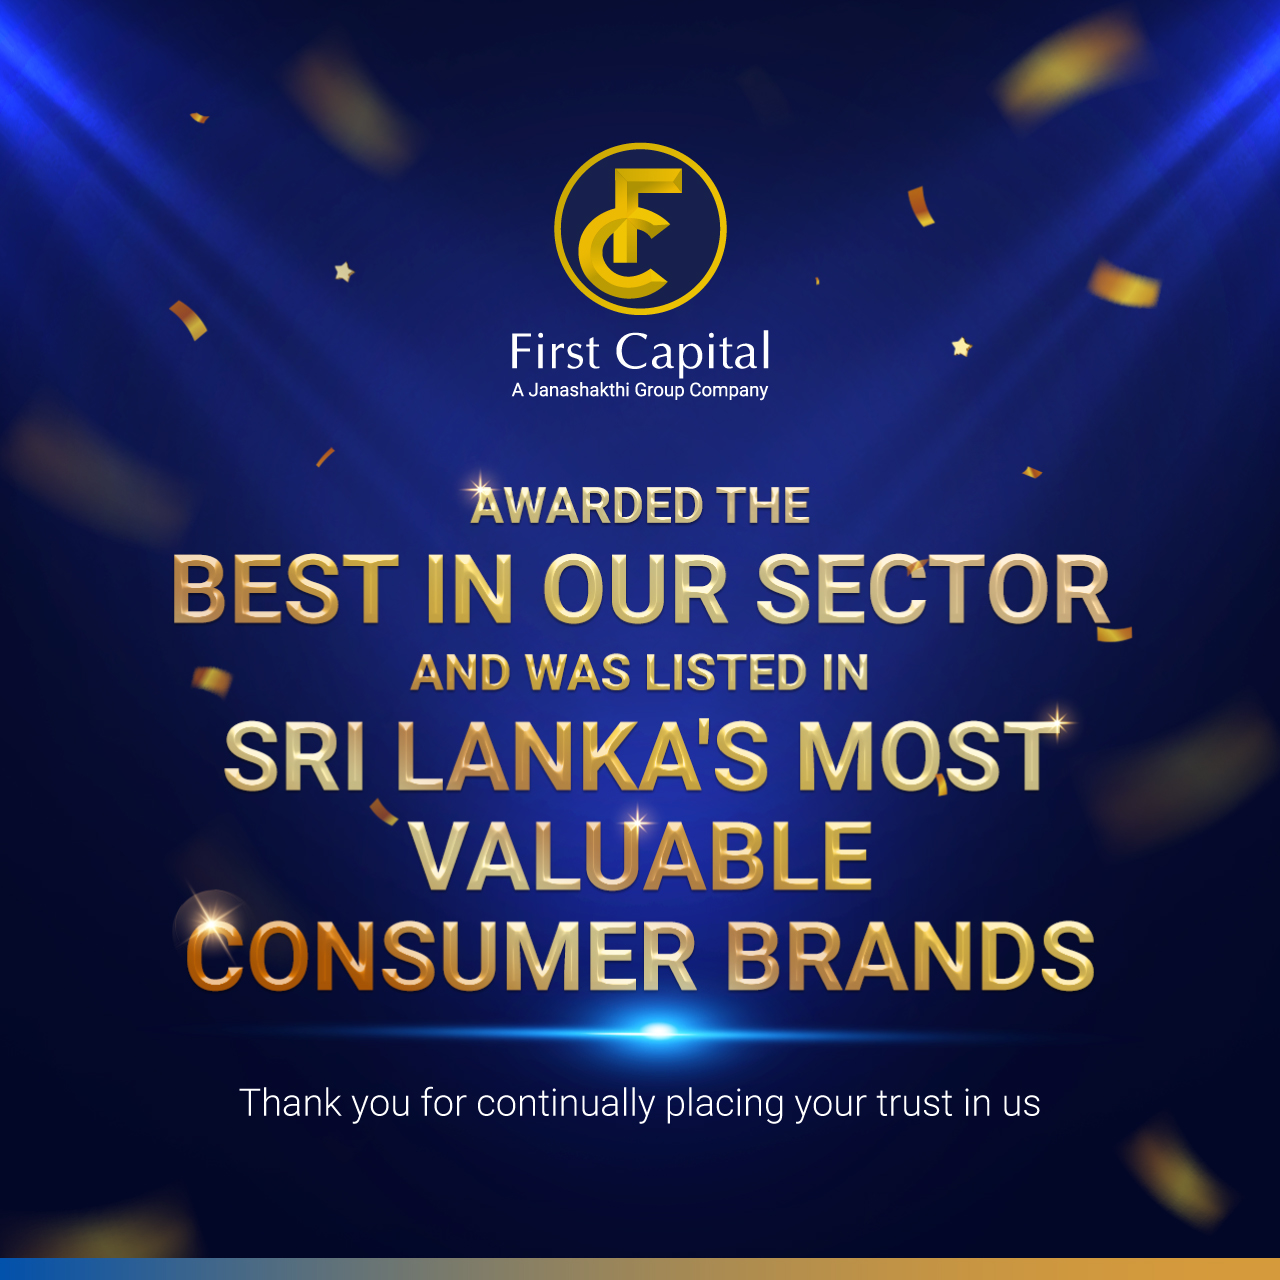 ‘BEST IN OUR SECTOR’ AND ENTERED THE LIST AS ONE OF ‘SRI LANKA’S MOST VALUABLE CONSUMER BRANDS’ BY LMD’S